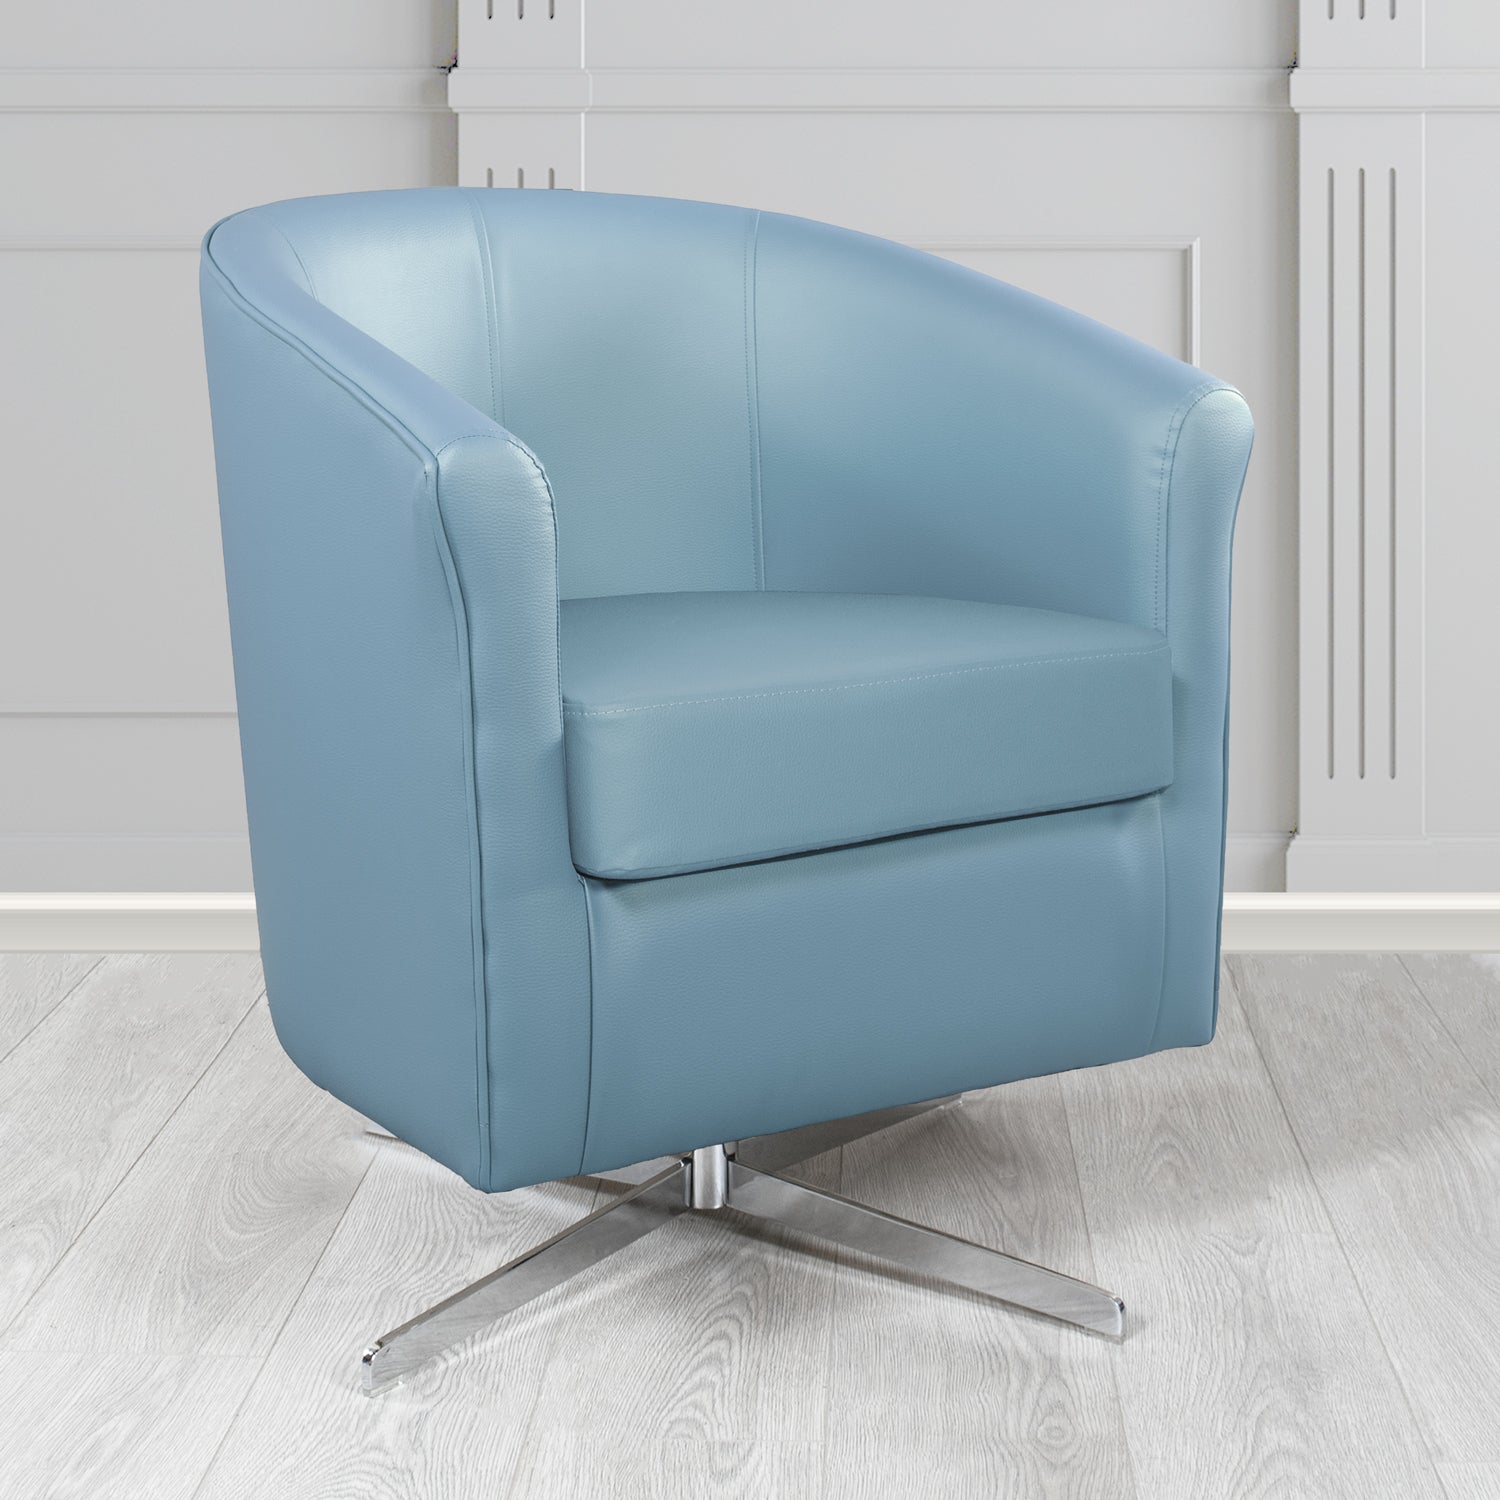 Cannes Swivel Tub Chair in Just Colour Cool Blue Crib 5 Faux Leather